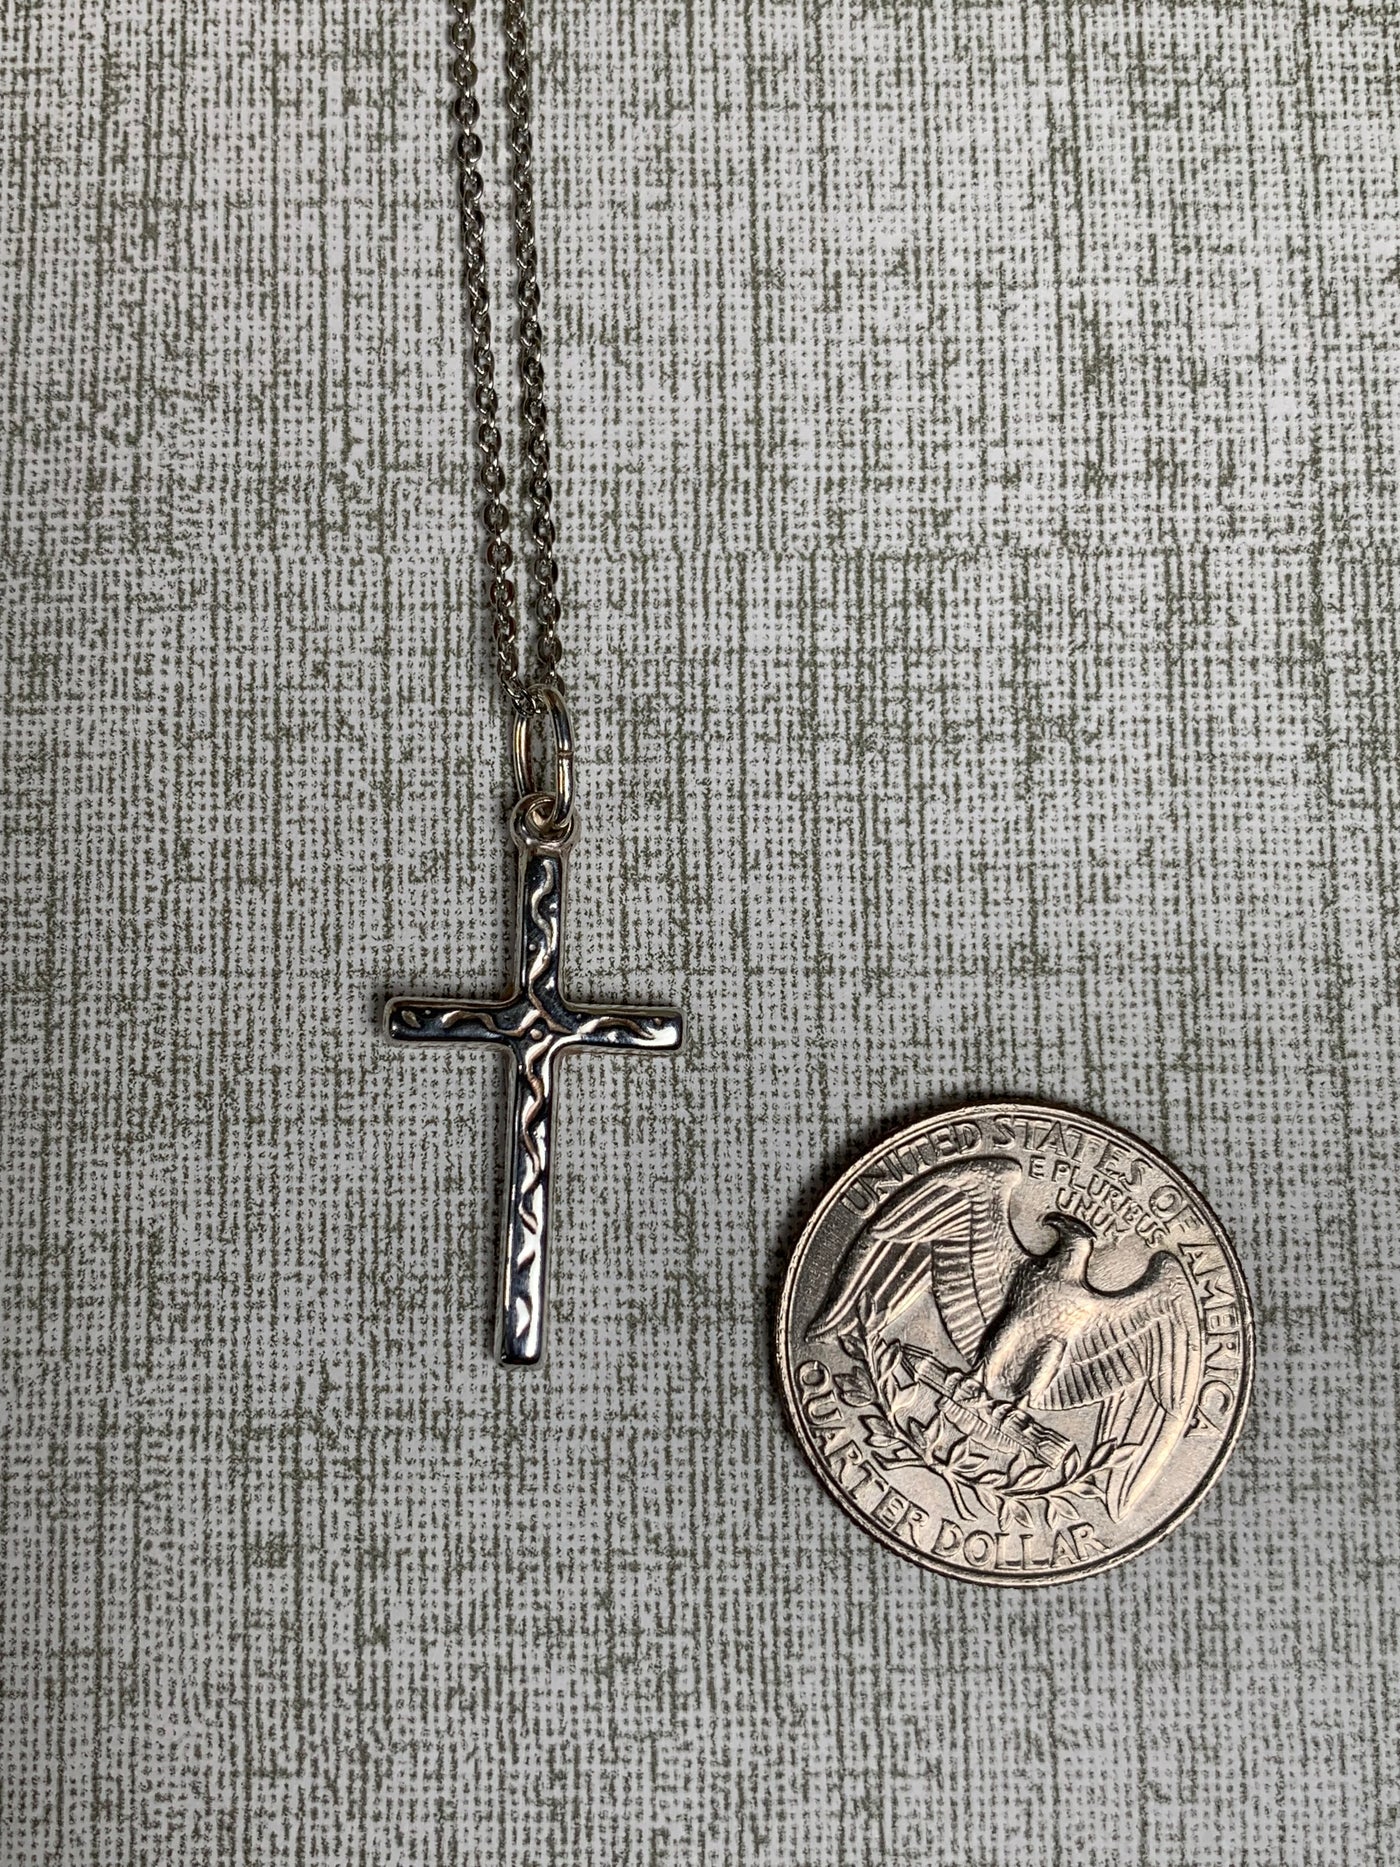 Sterling Silver Cross Pendant with "Wiggly Pattern" Design